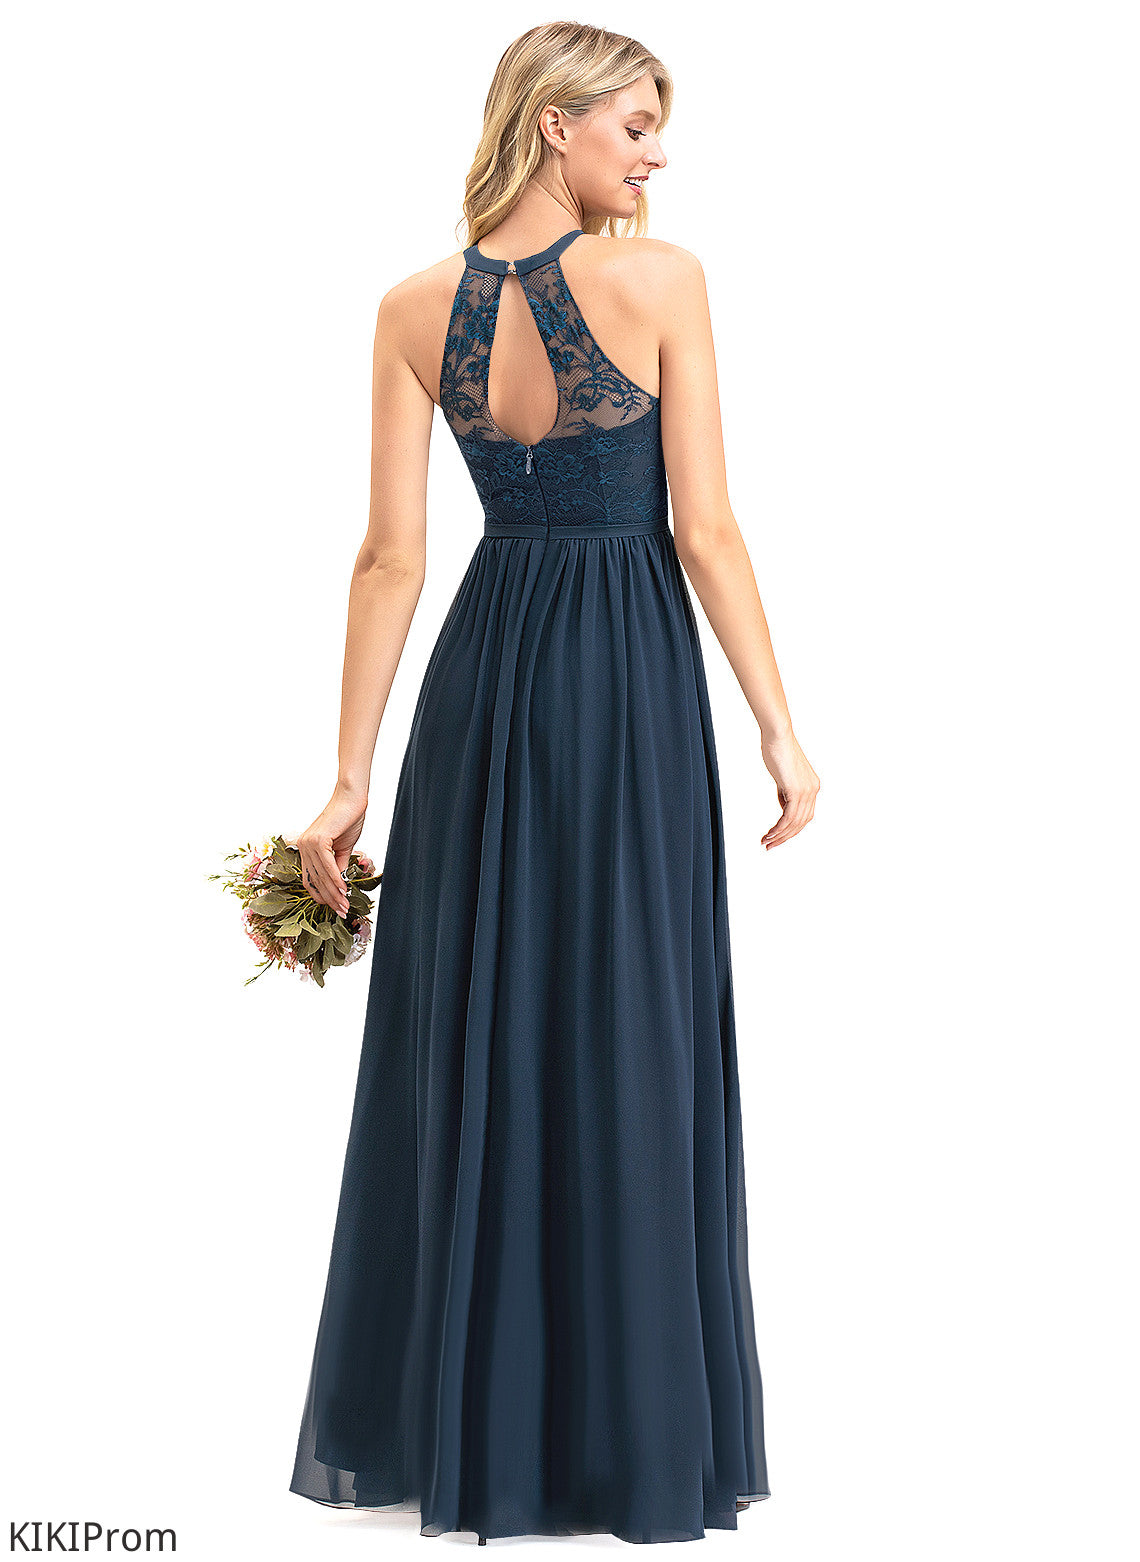 Scoop A-Line Fabric Silhouette Floor-Length Length Illusion Lace Straps&Sleeves Neckline Marianna Floor Length Bridesmaid Dresses